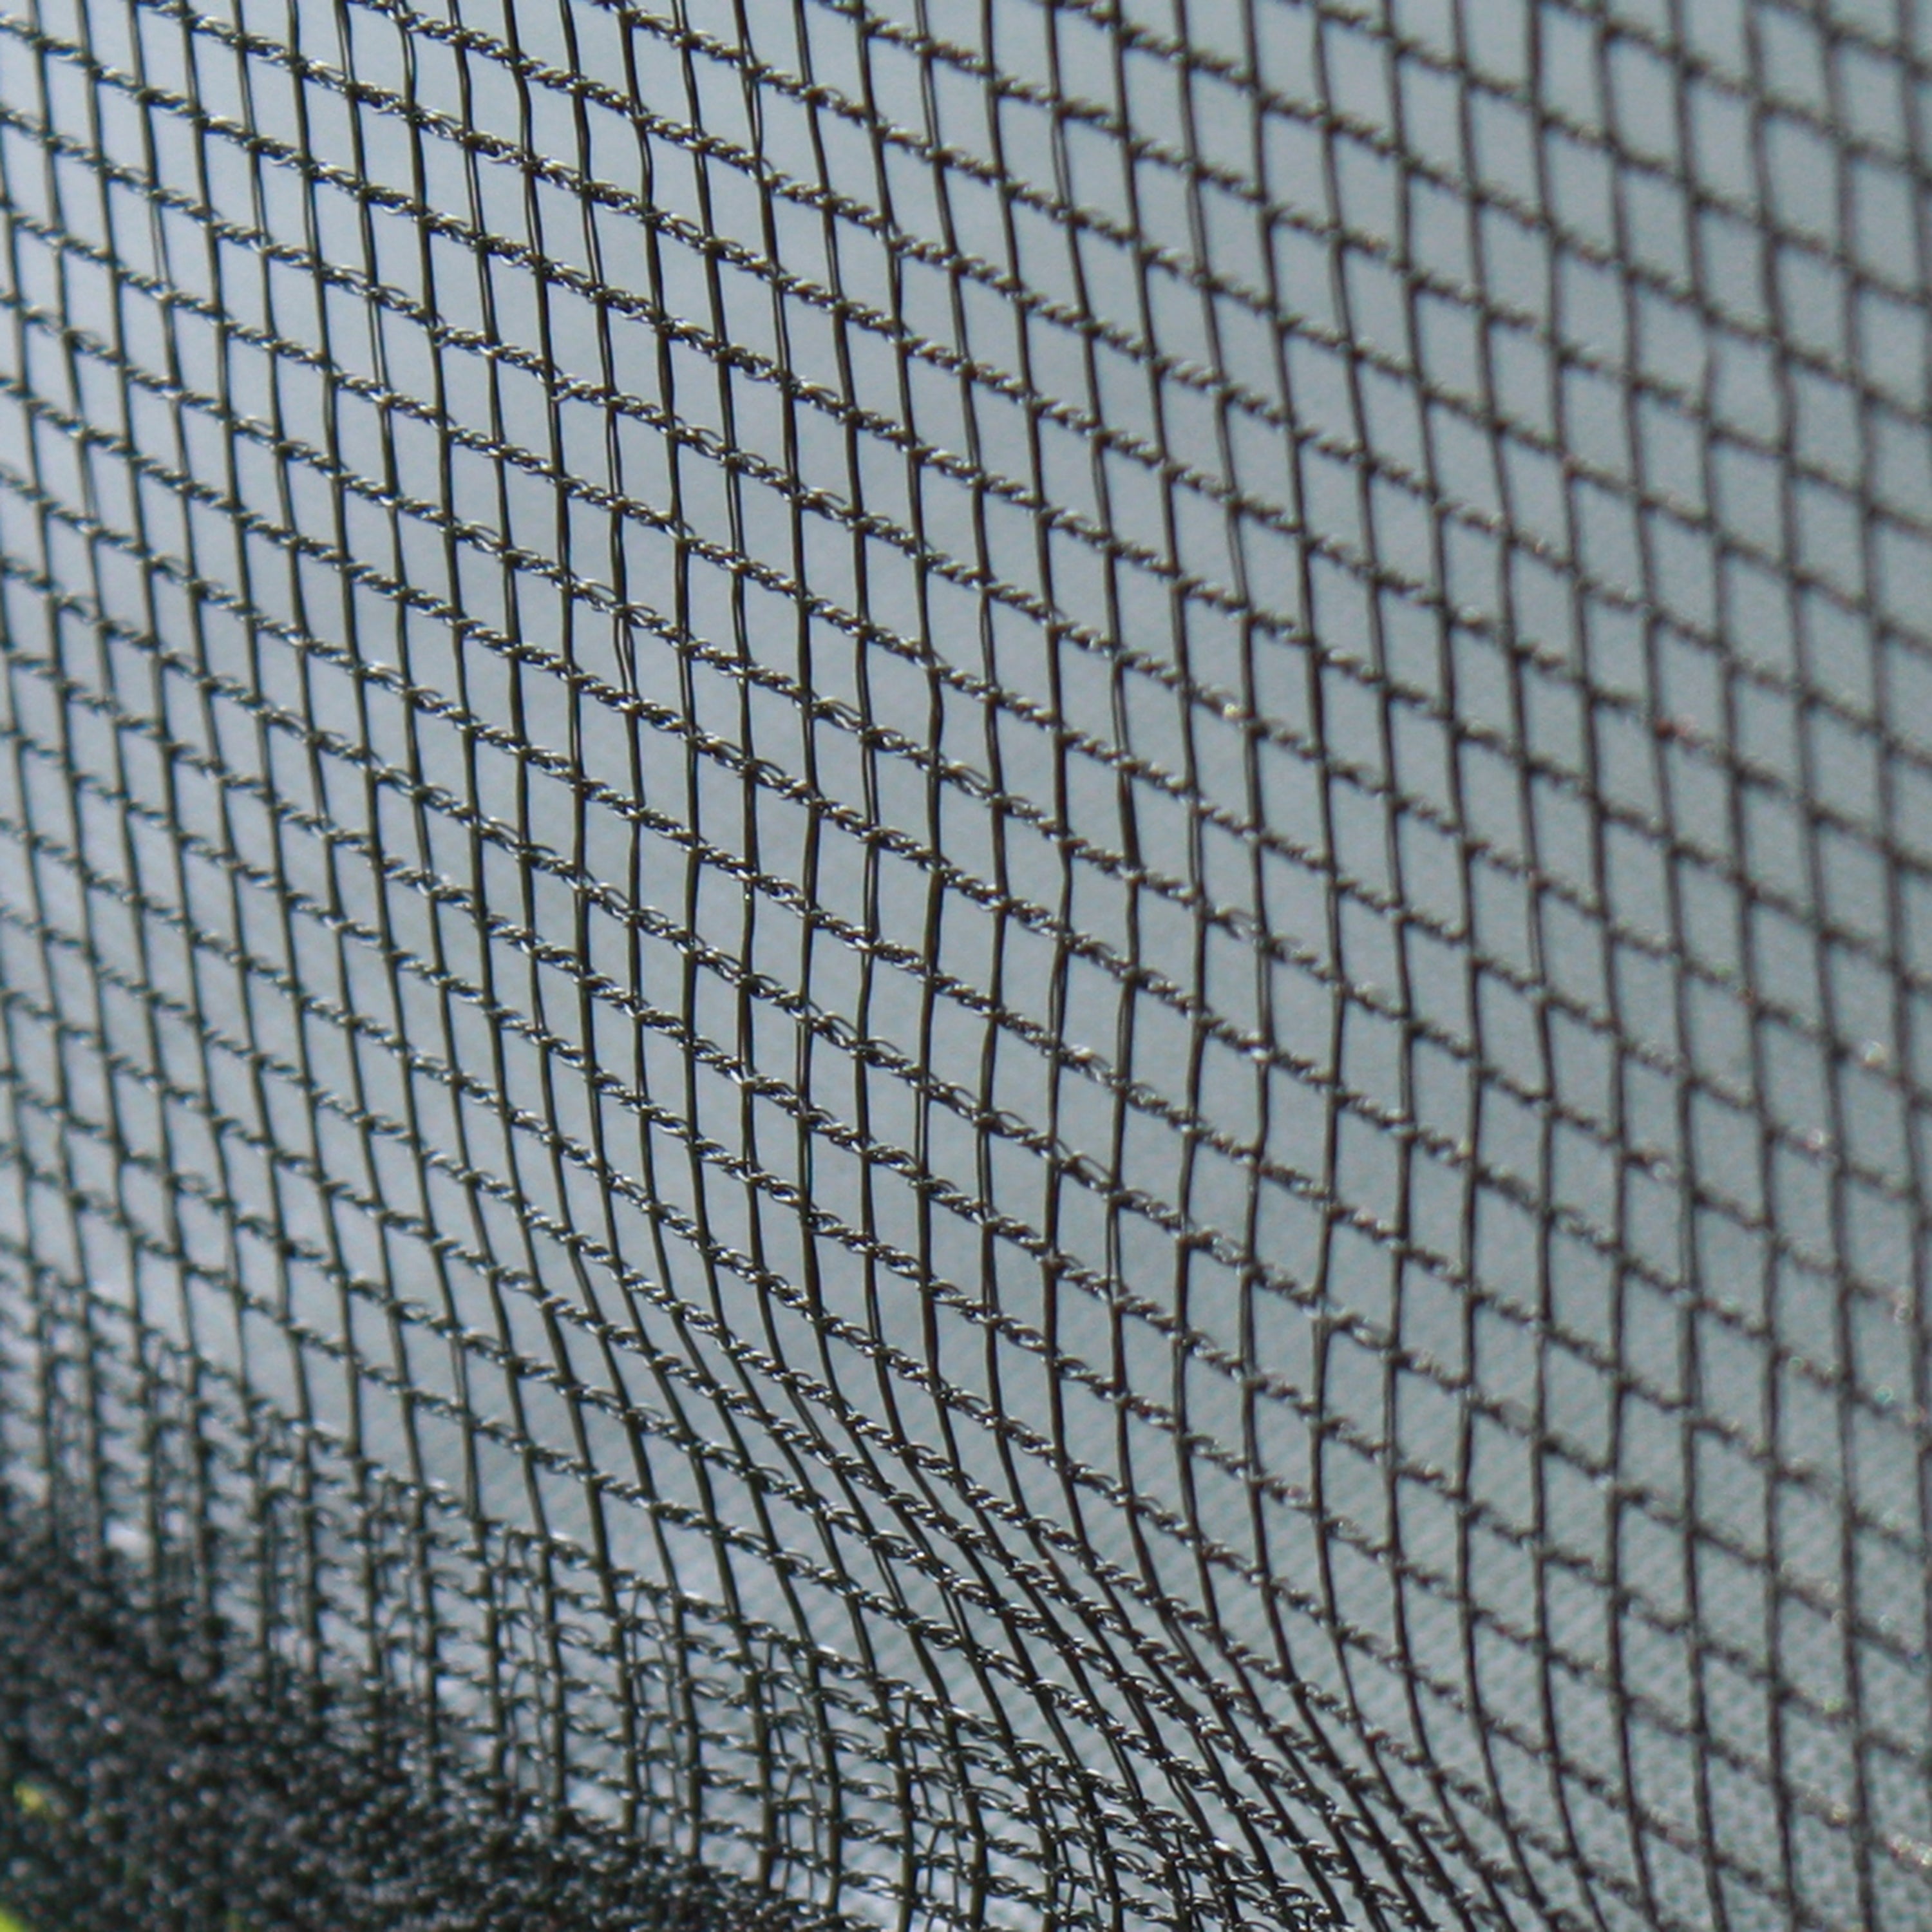 Very tightly woven polyethylene forms the enclosure net. 